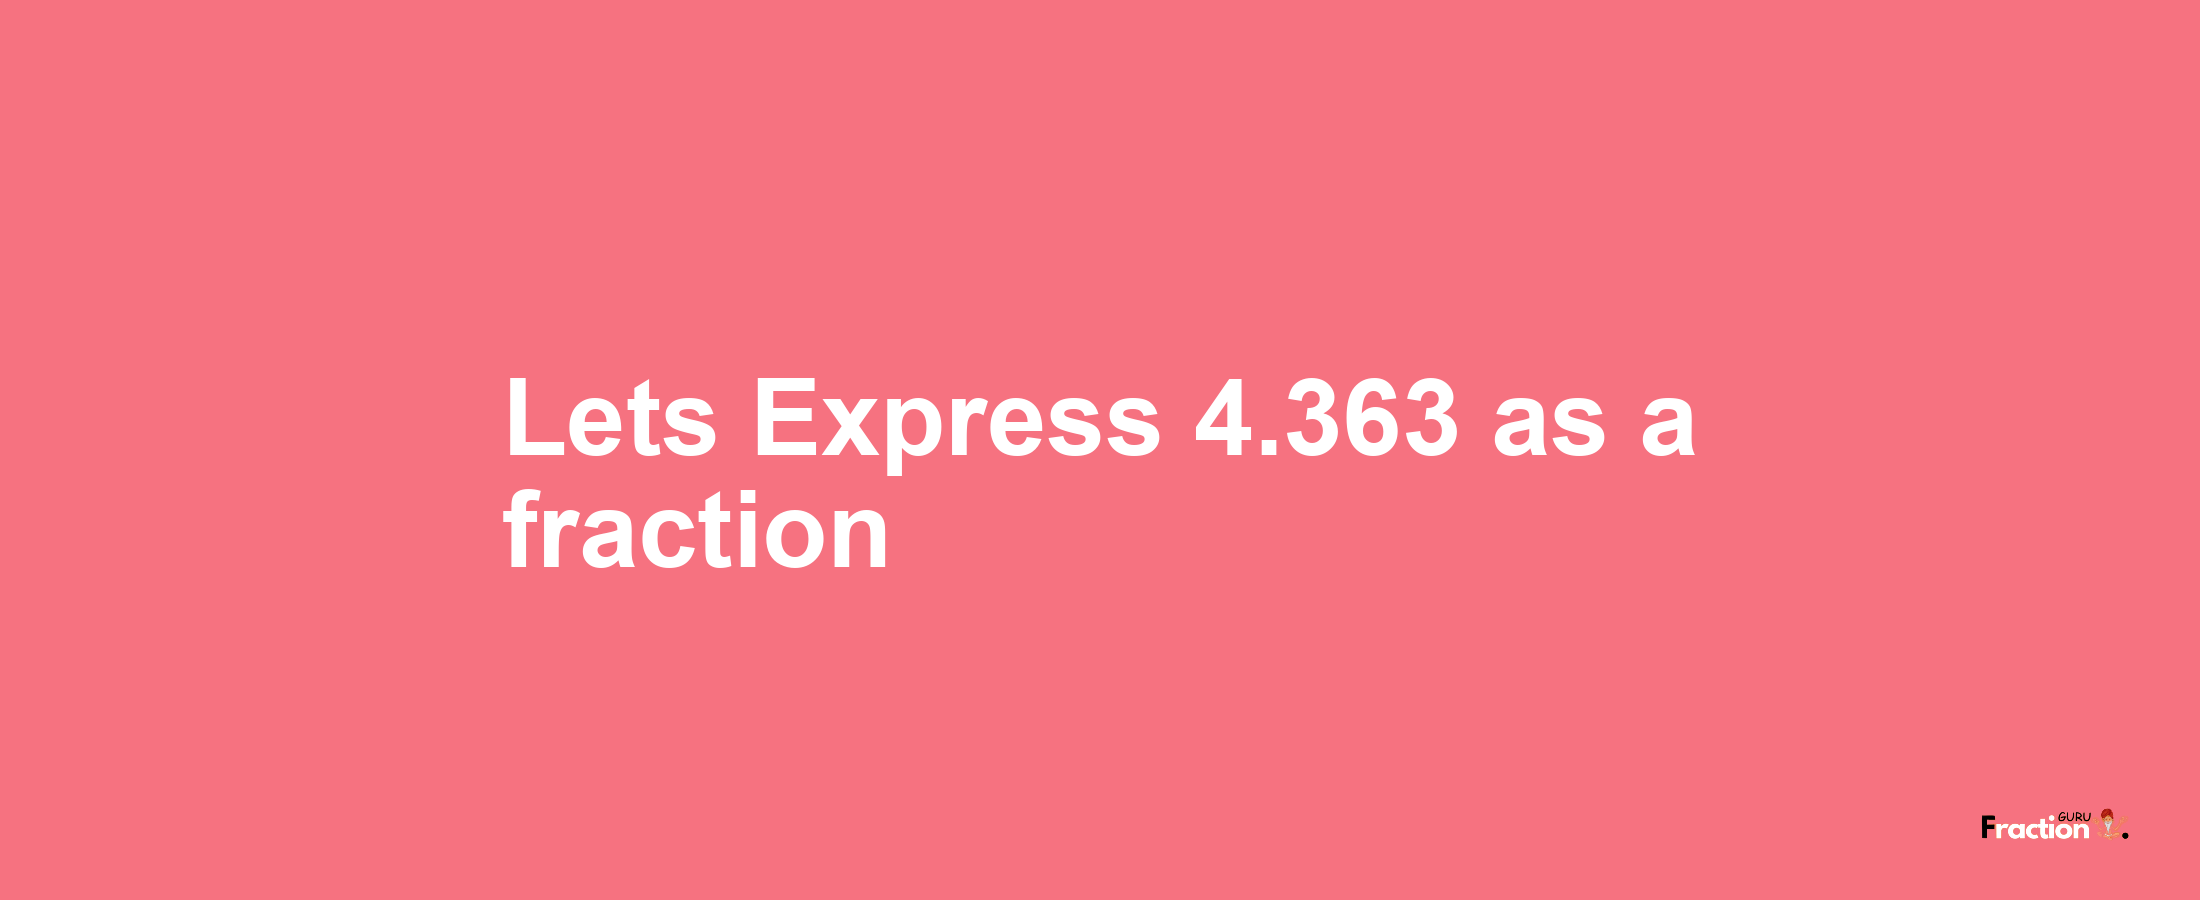 Lets Express 4.363 as afraction